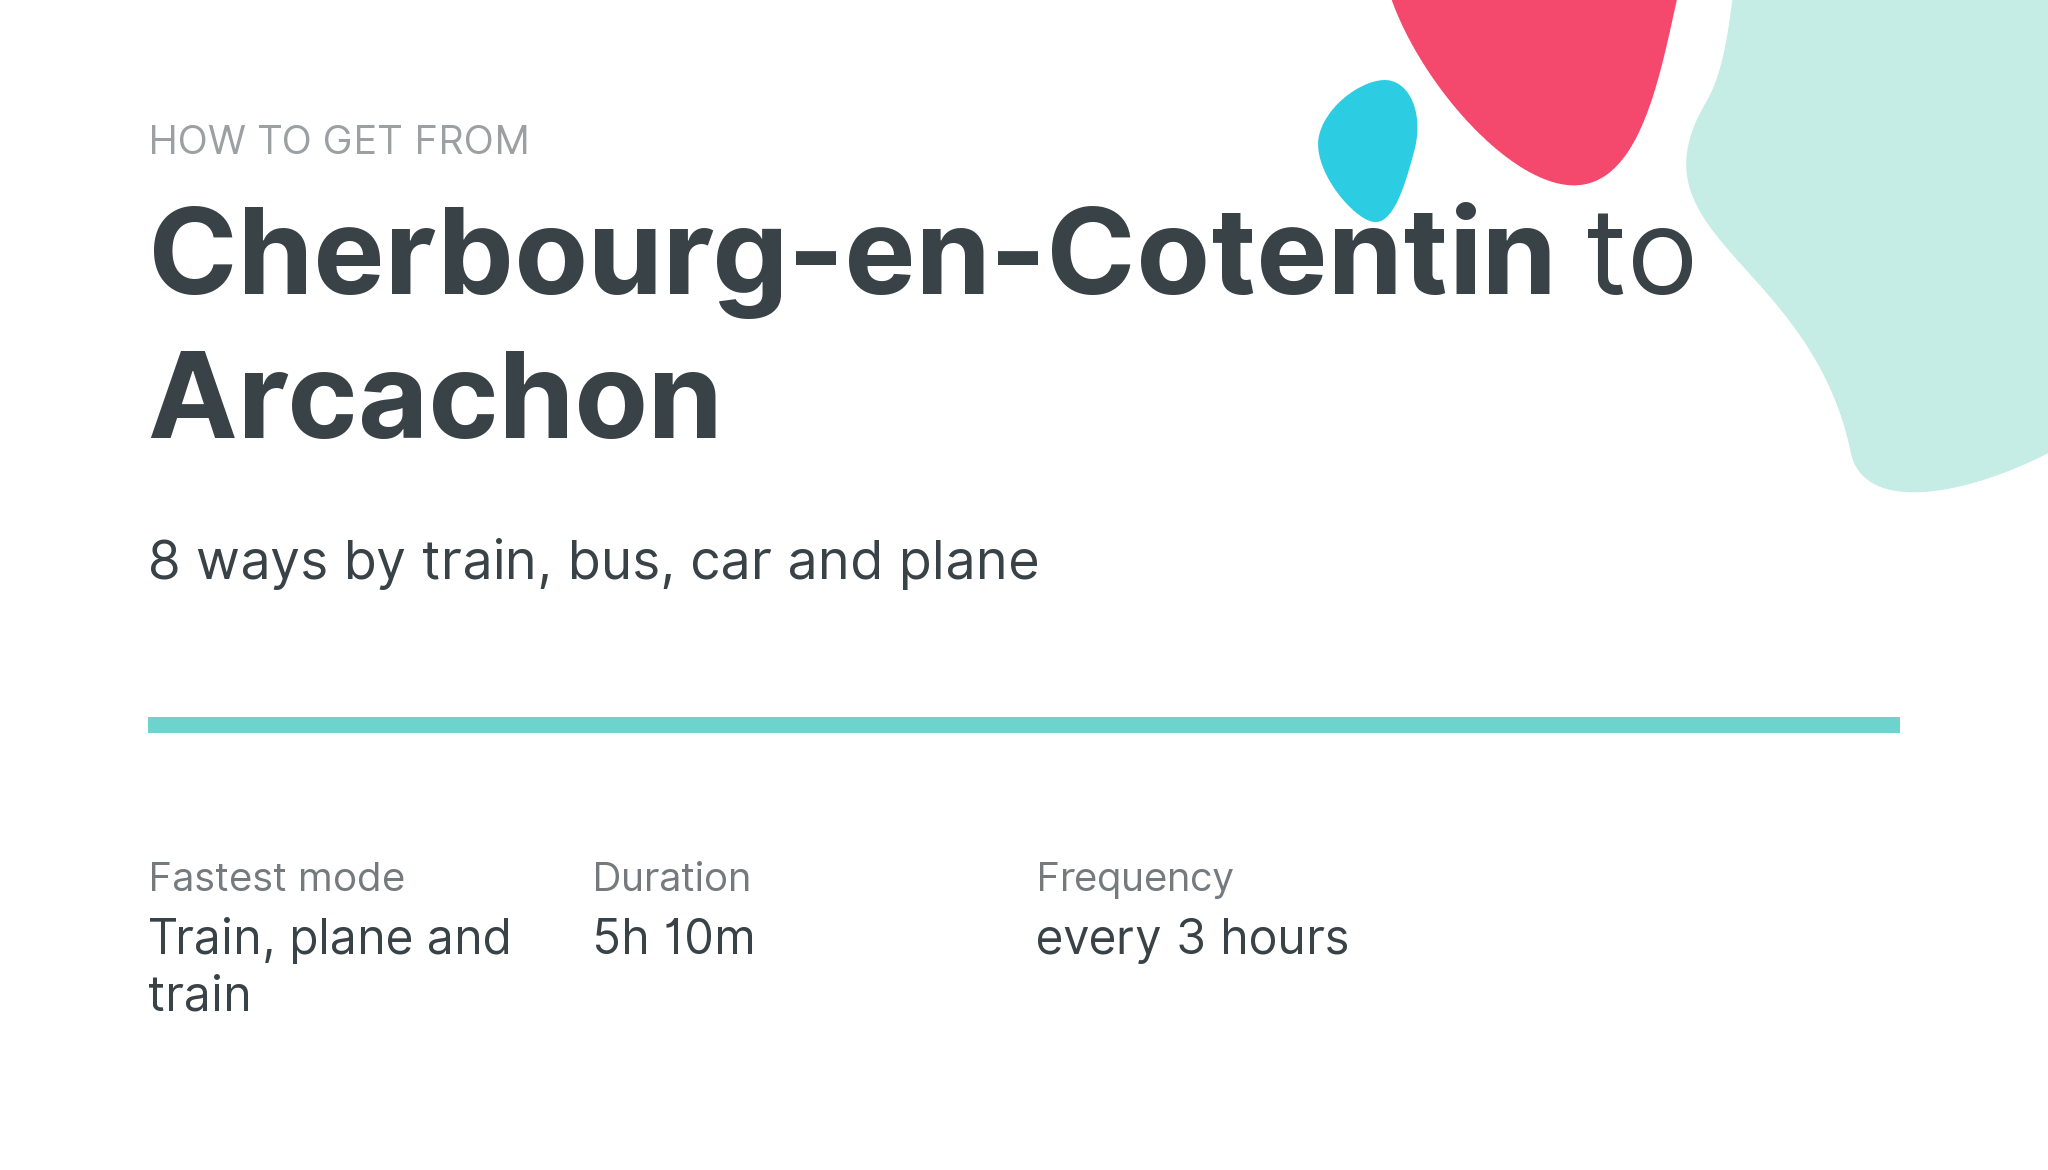 How do I get from Cherbourg-en-Cotentin to Arcachon